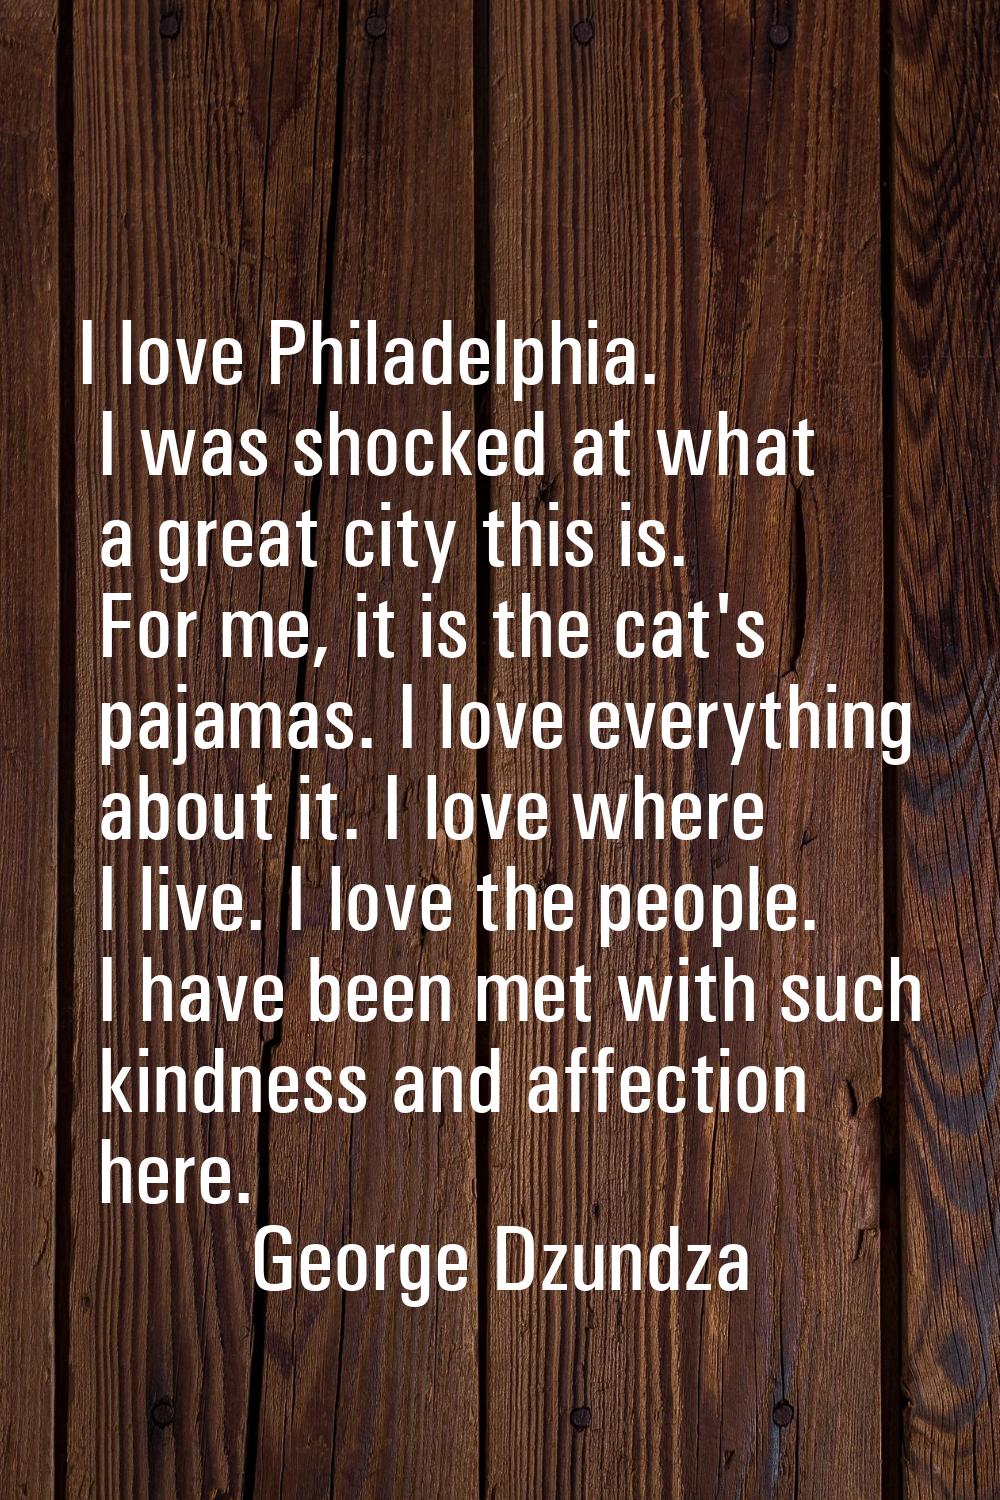 I love Philadelphia. I was shocked at what a great city this is. For me, it is the cat's pajamas. I